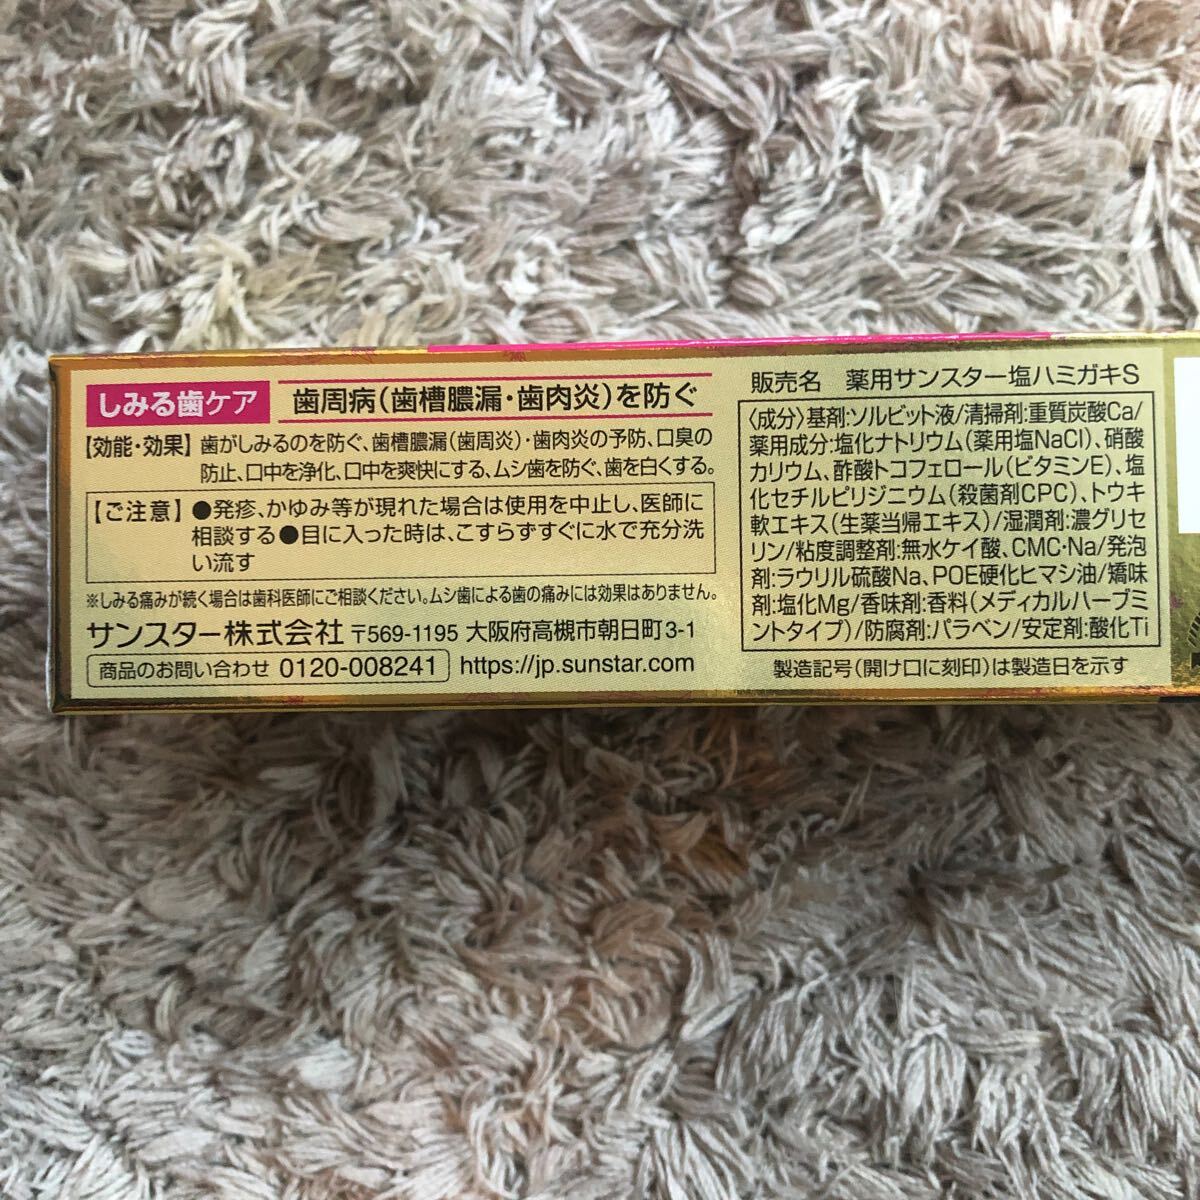 [ free shipping ]82g×3 Sunstar raw medicine present .. power ...... see tooth care type tooth .. leak * tooth meat .. prevent medicine for salt is migaki